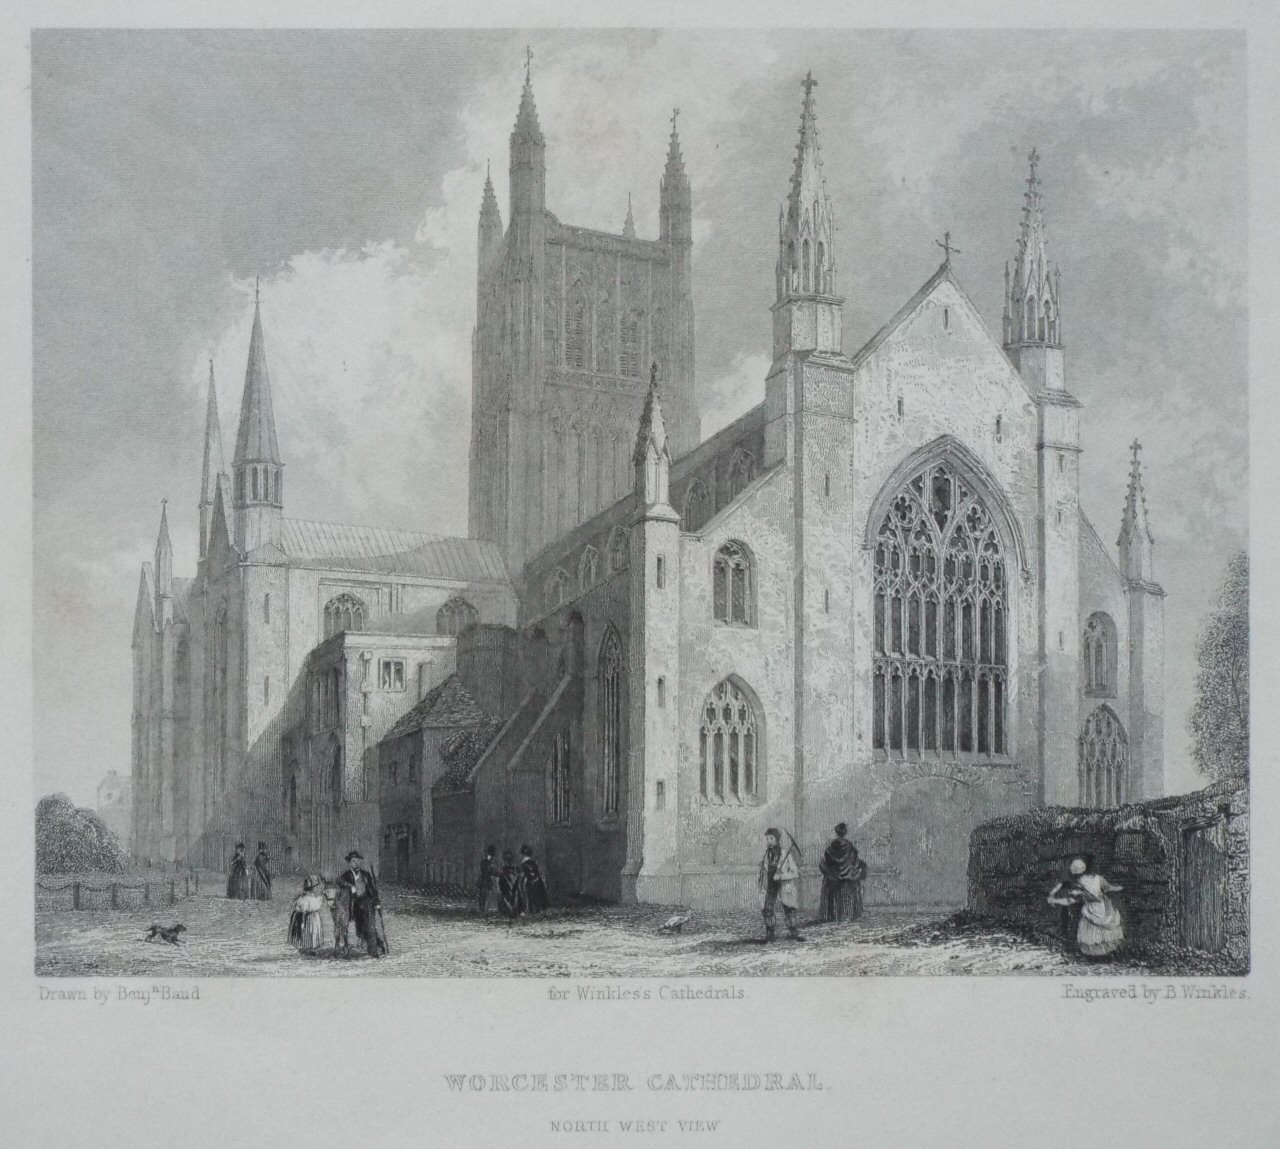 Print - Worcester Cathedral. North West View. - Winkles